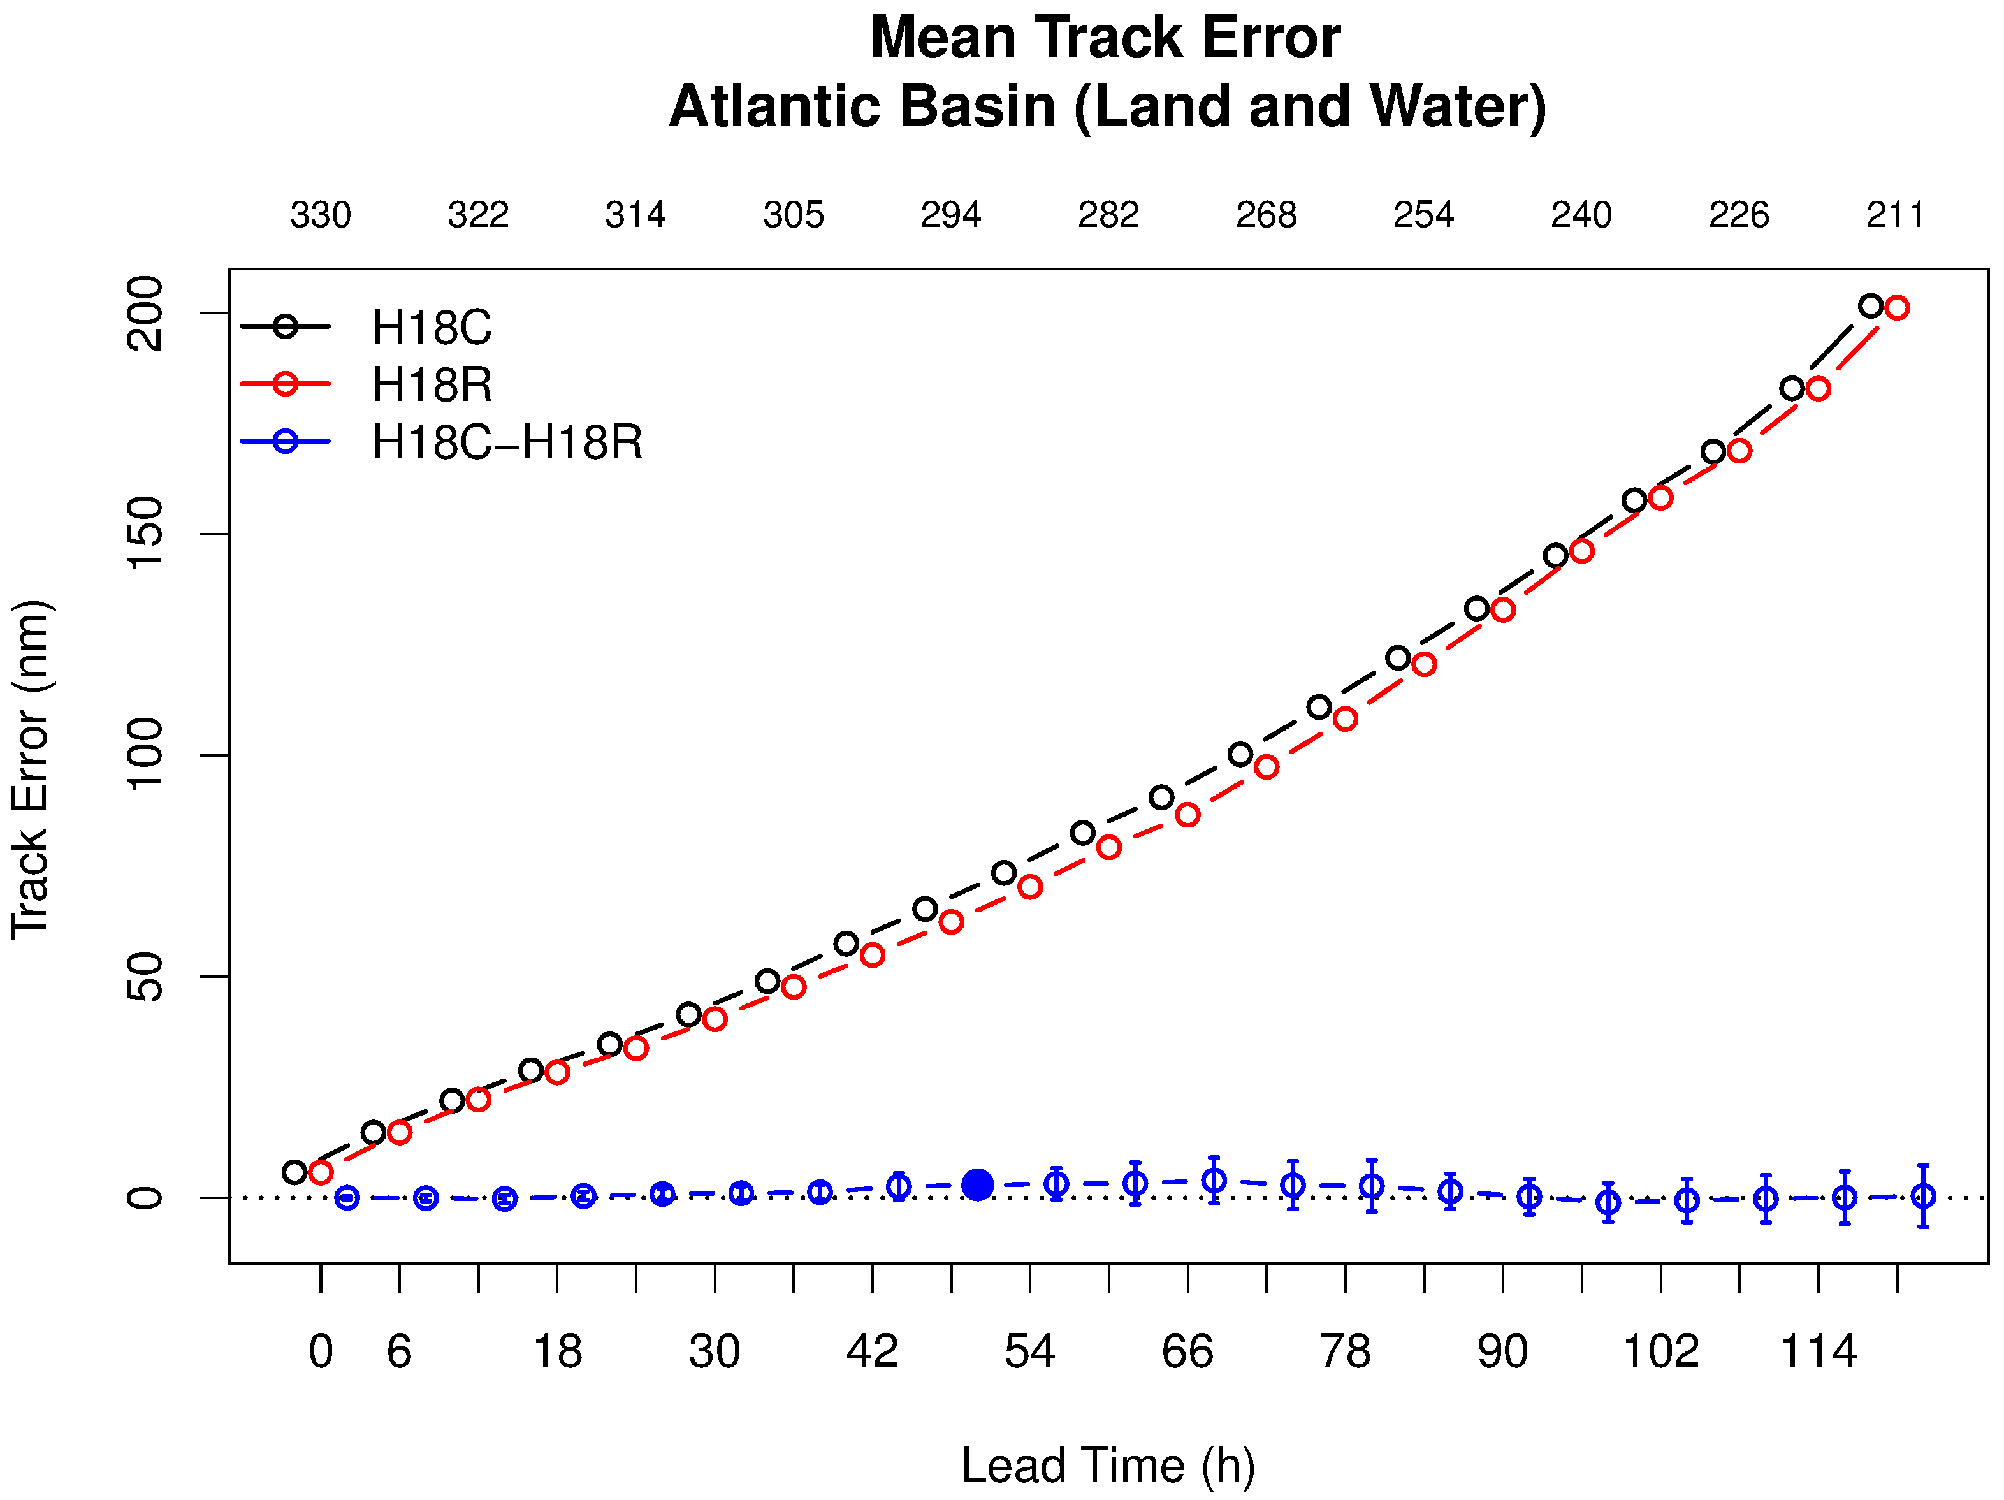 Mean Track Error - Atlantic Basin (land and water)